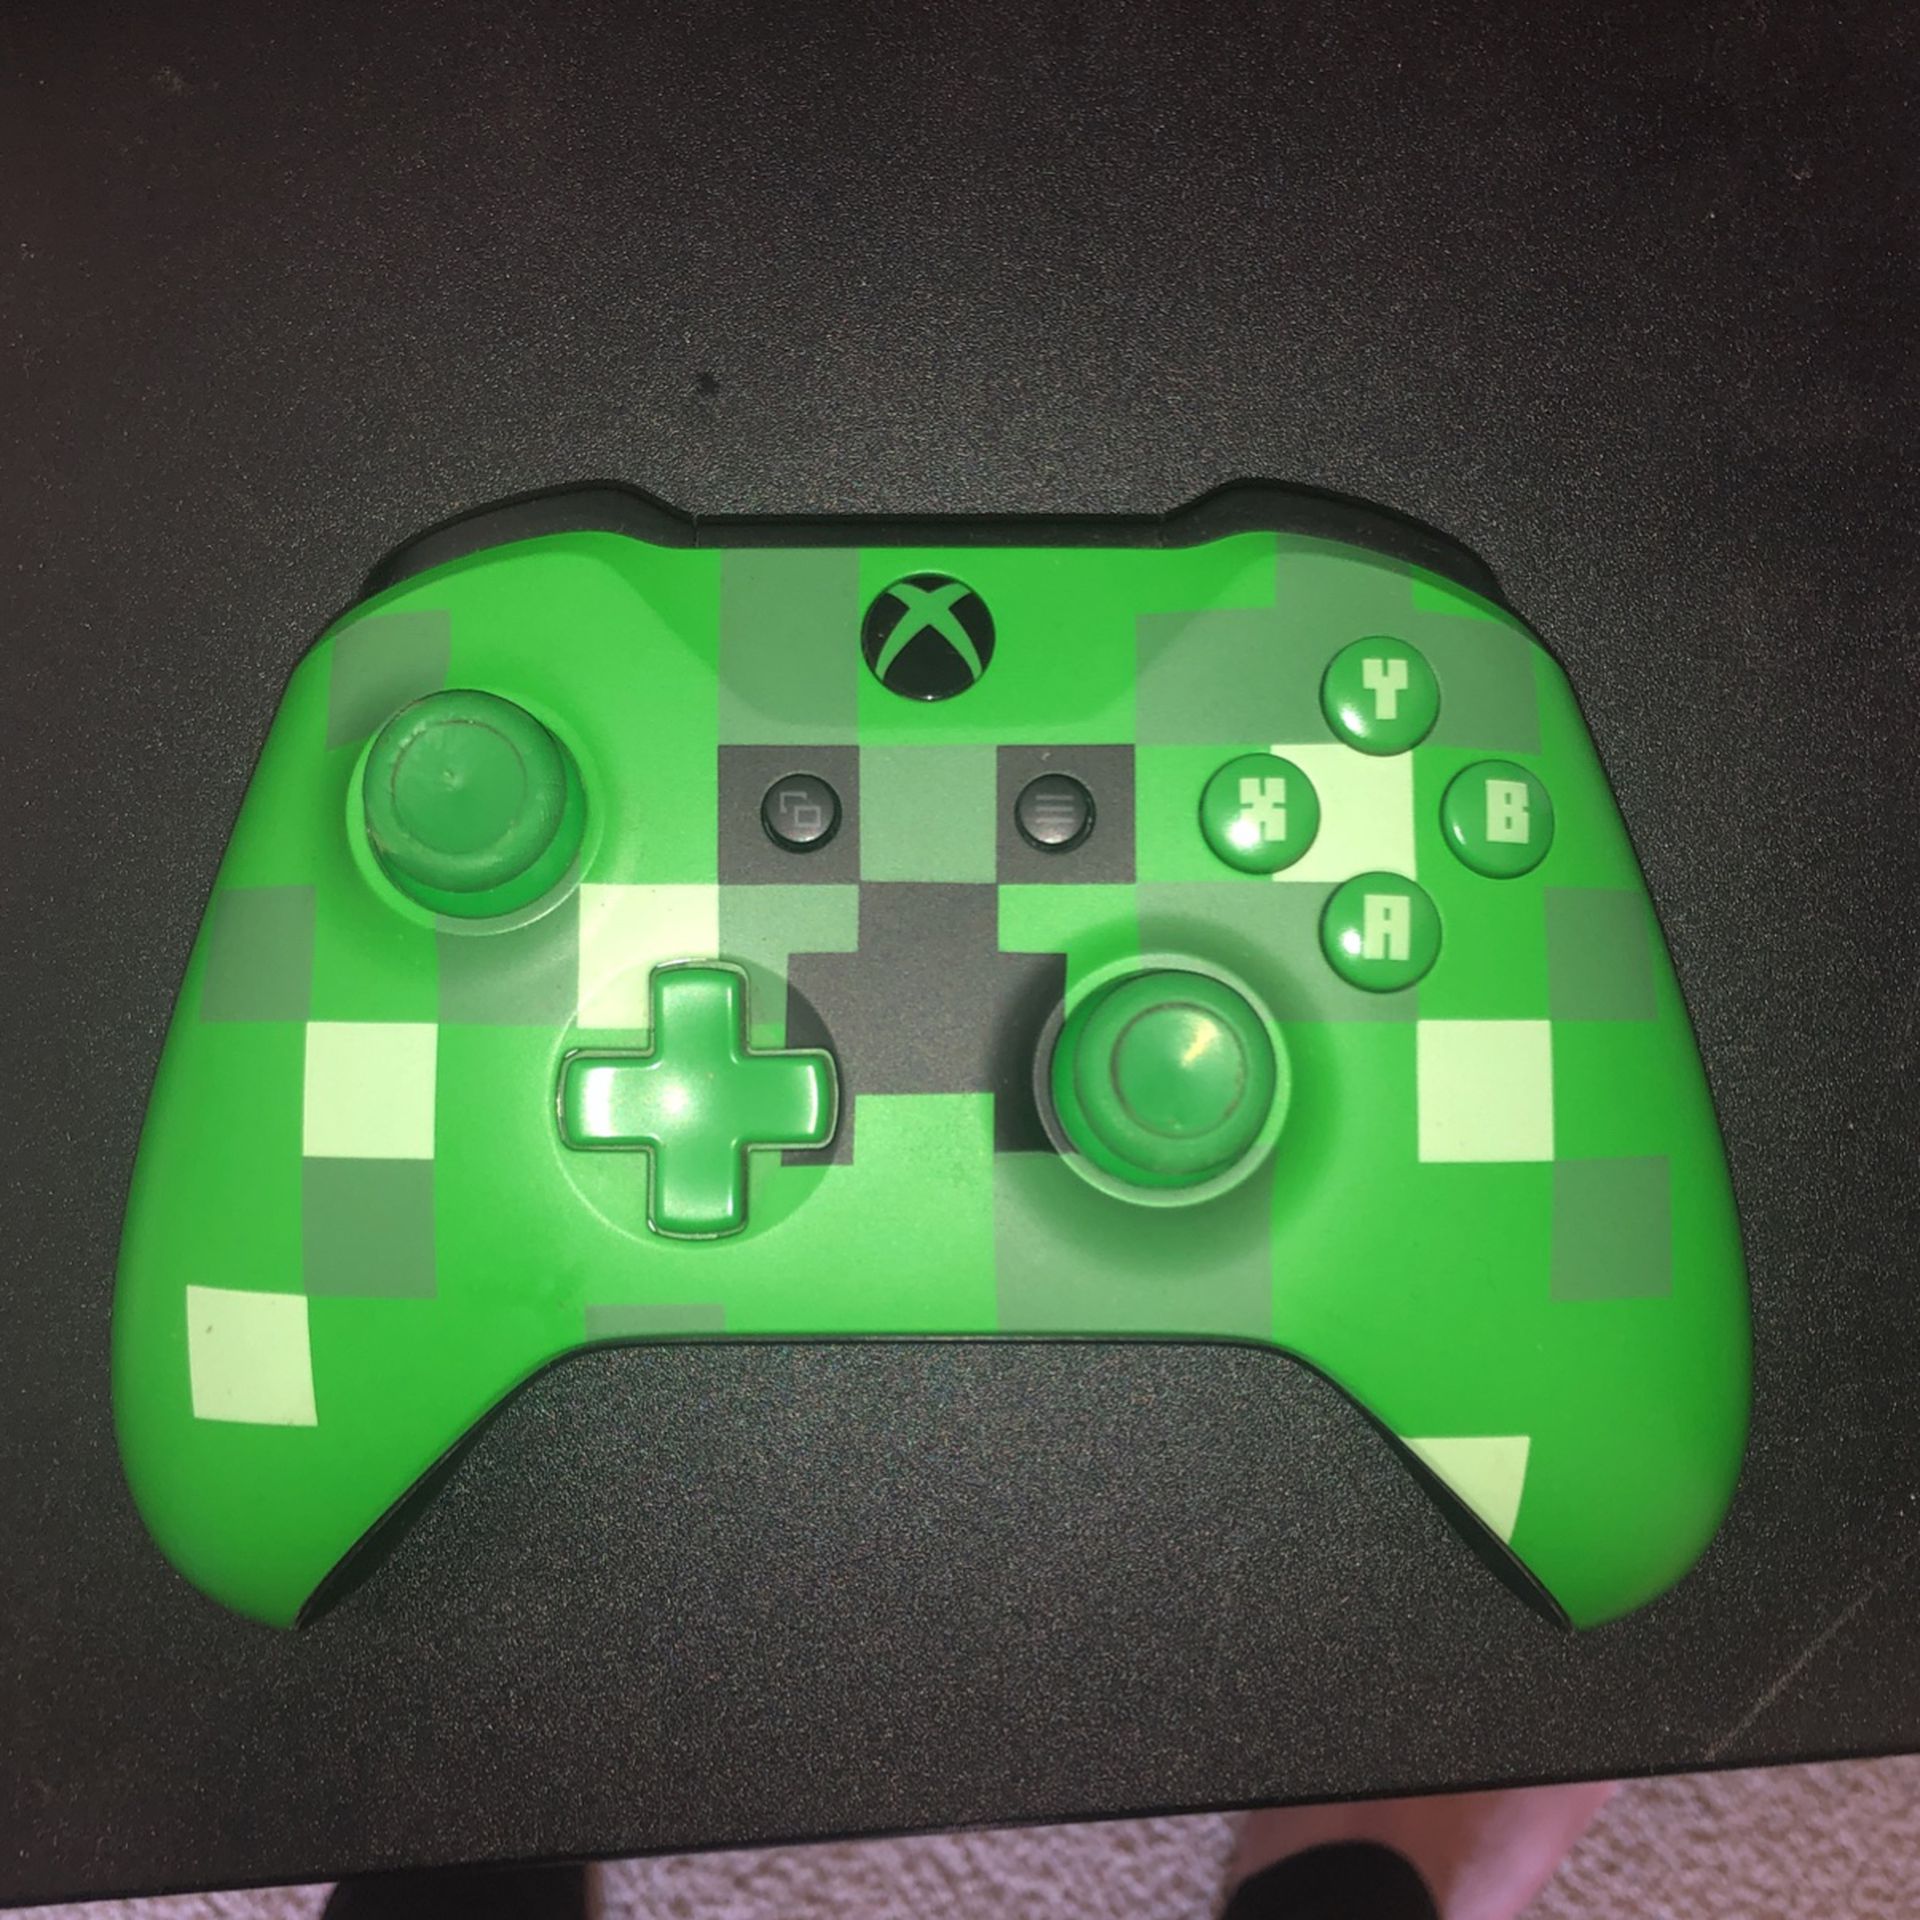 Verslinden Rauw Brochure DISCONTINUED MINECRAFT XBOX CONTROLLER - CREEPER for Sale in Tustin, CA -  OfferUp